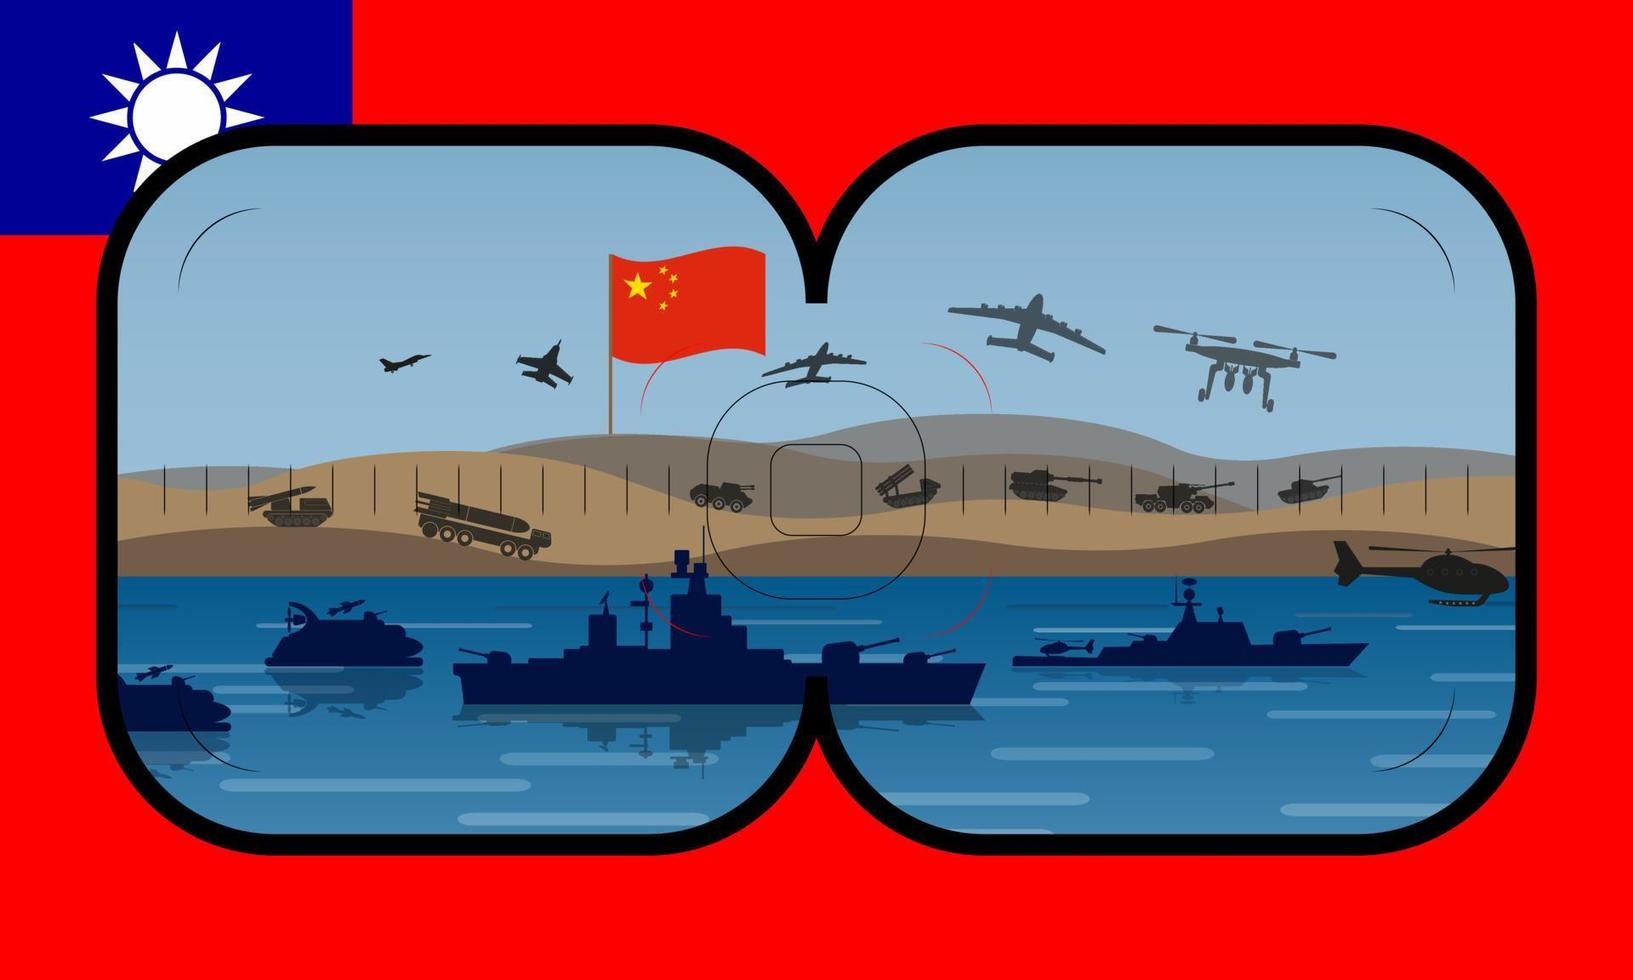 Vector illustration of Chinese exercises off the coast of Taiwan in the South China Sea. Periscope view with the flag of Taiwan in the background.